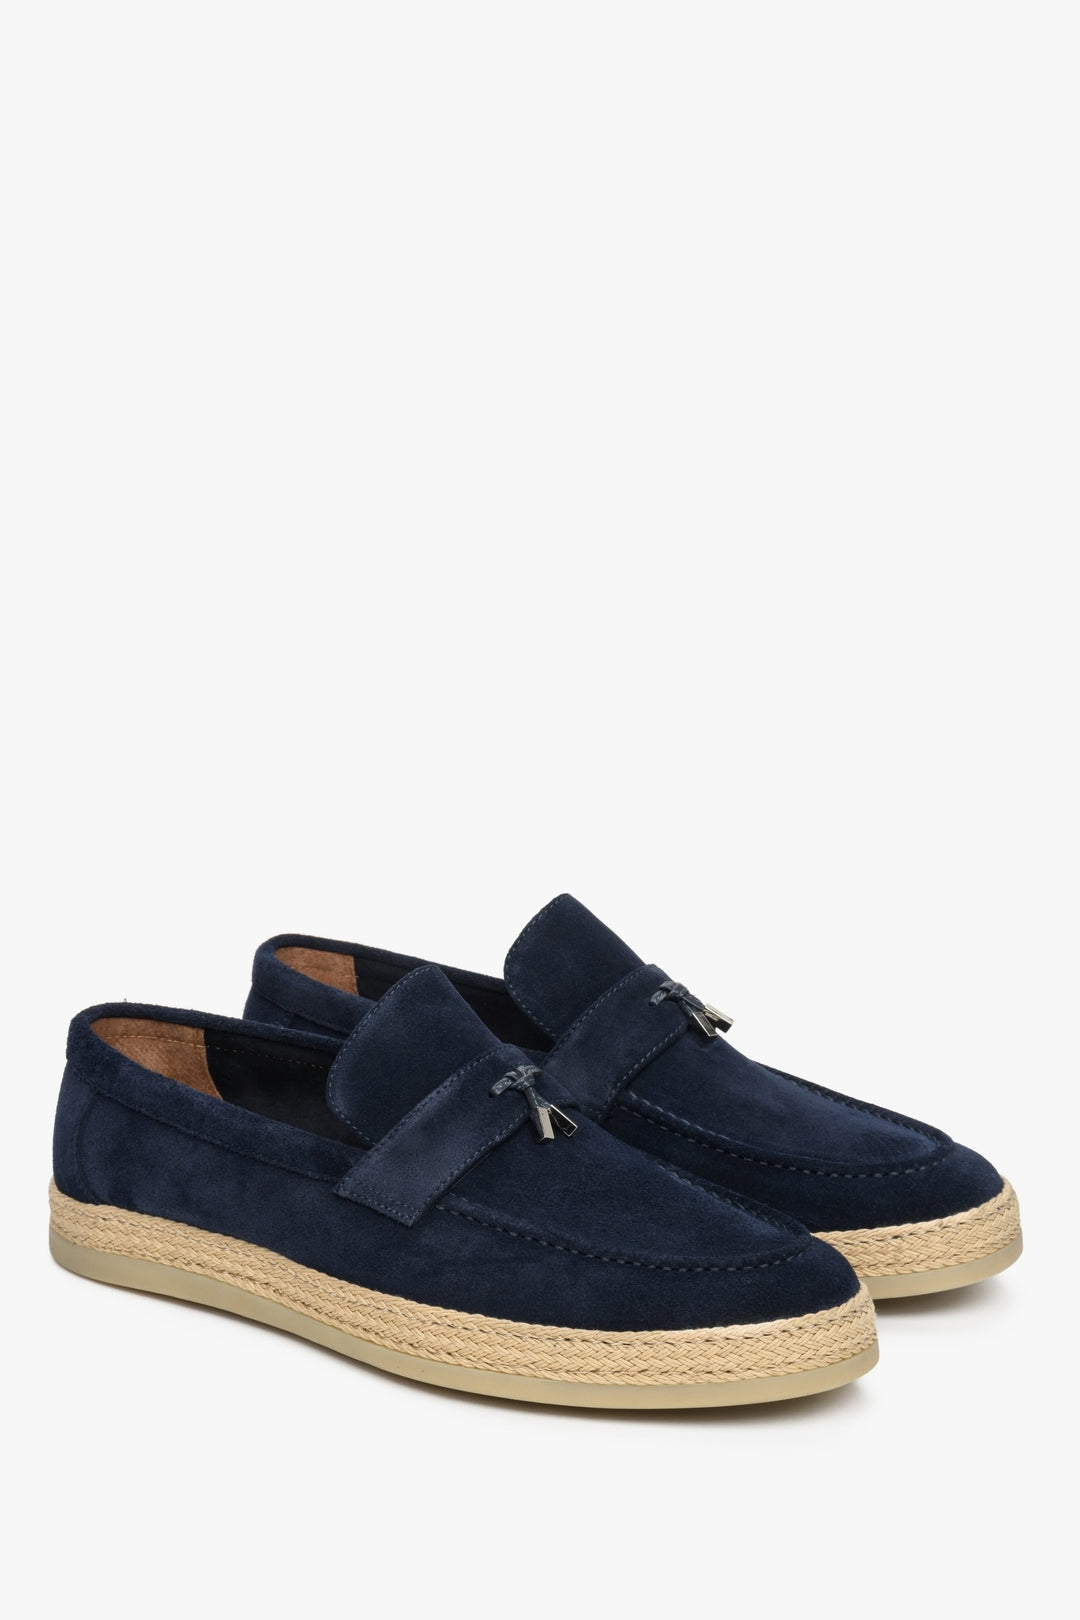 Velour men's loafers in navy blue for spring/fall - presentation of the toe and side seam of the shoes.